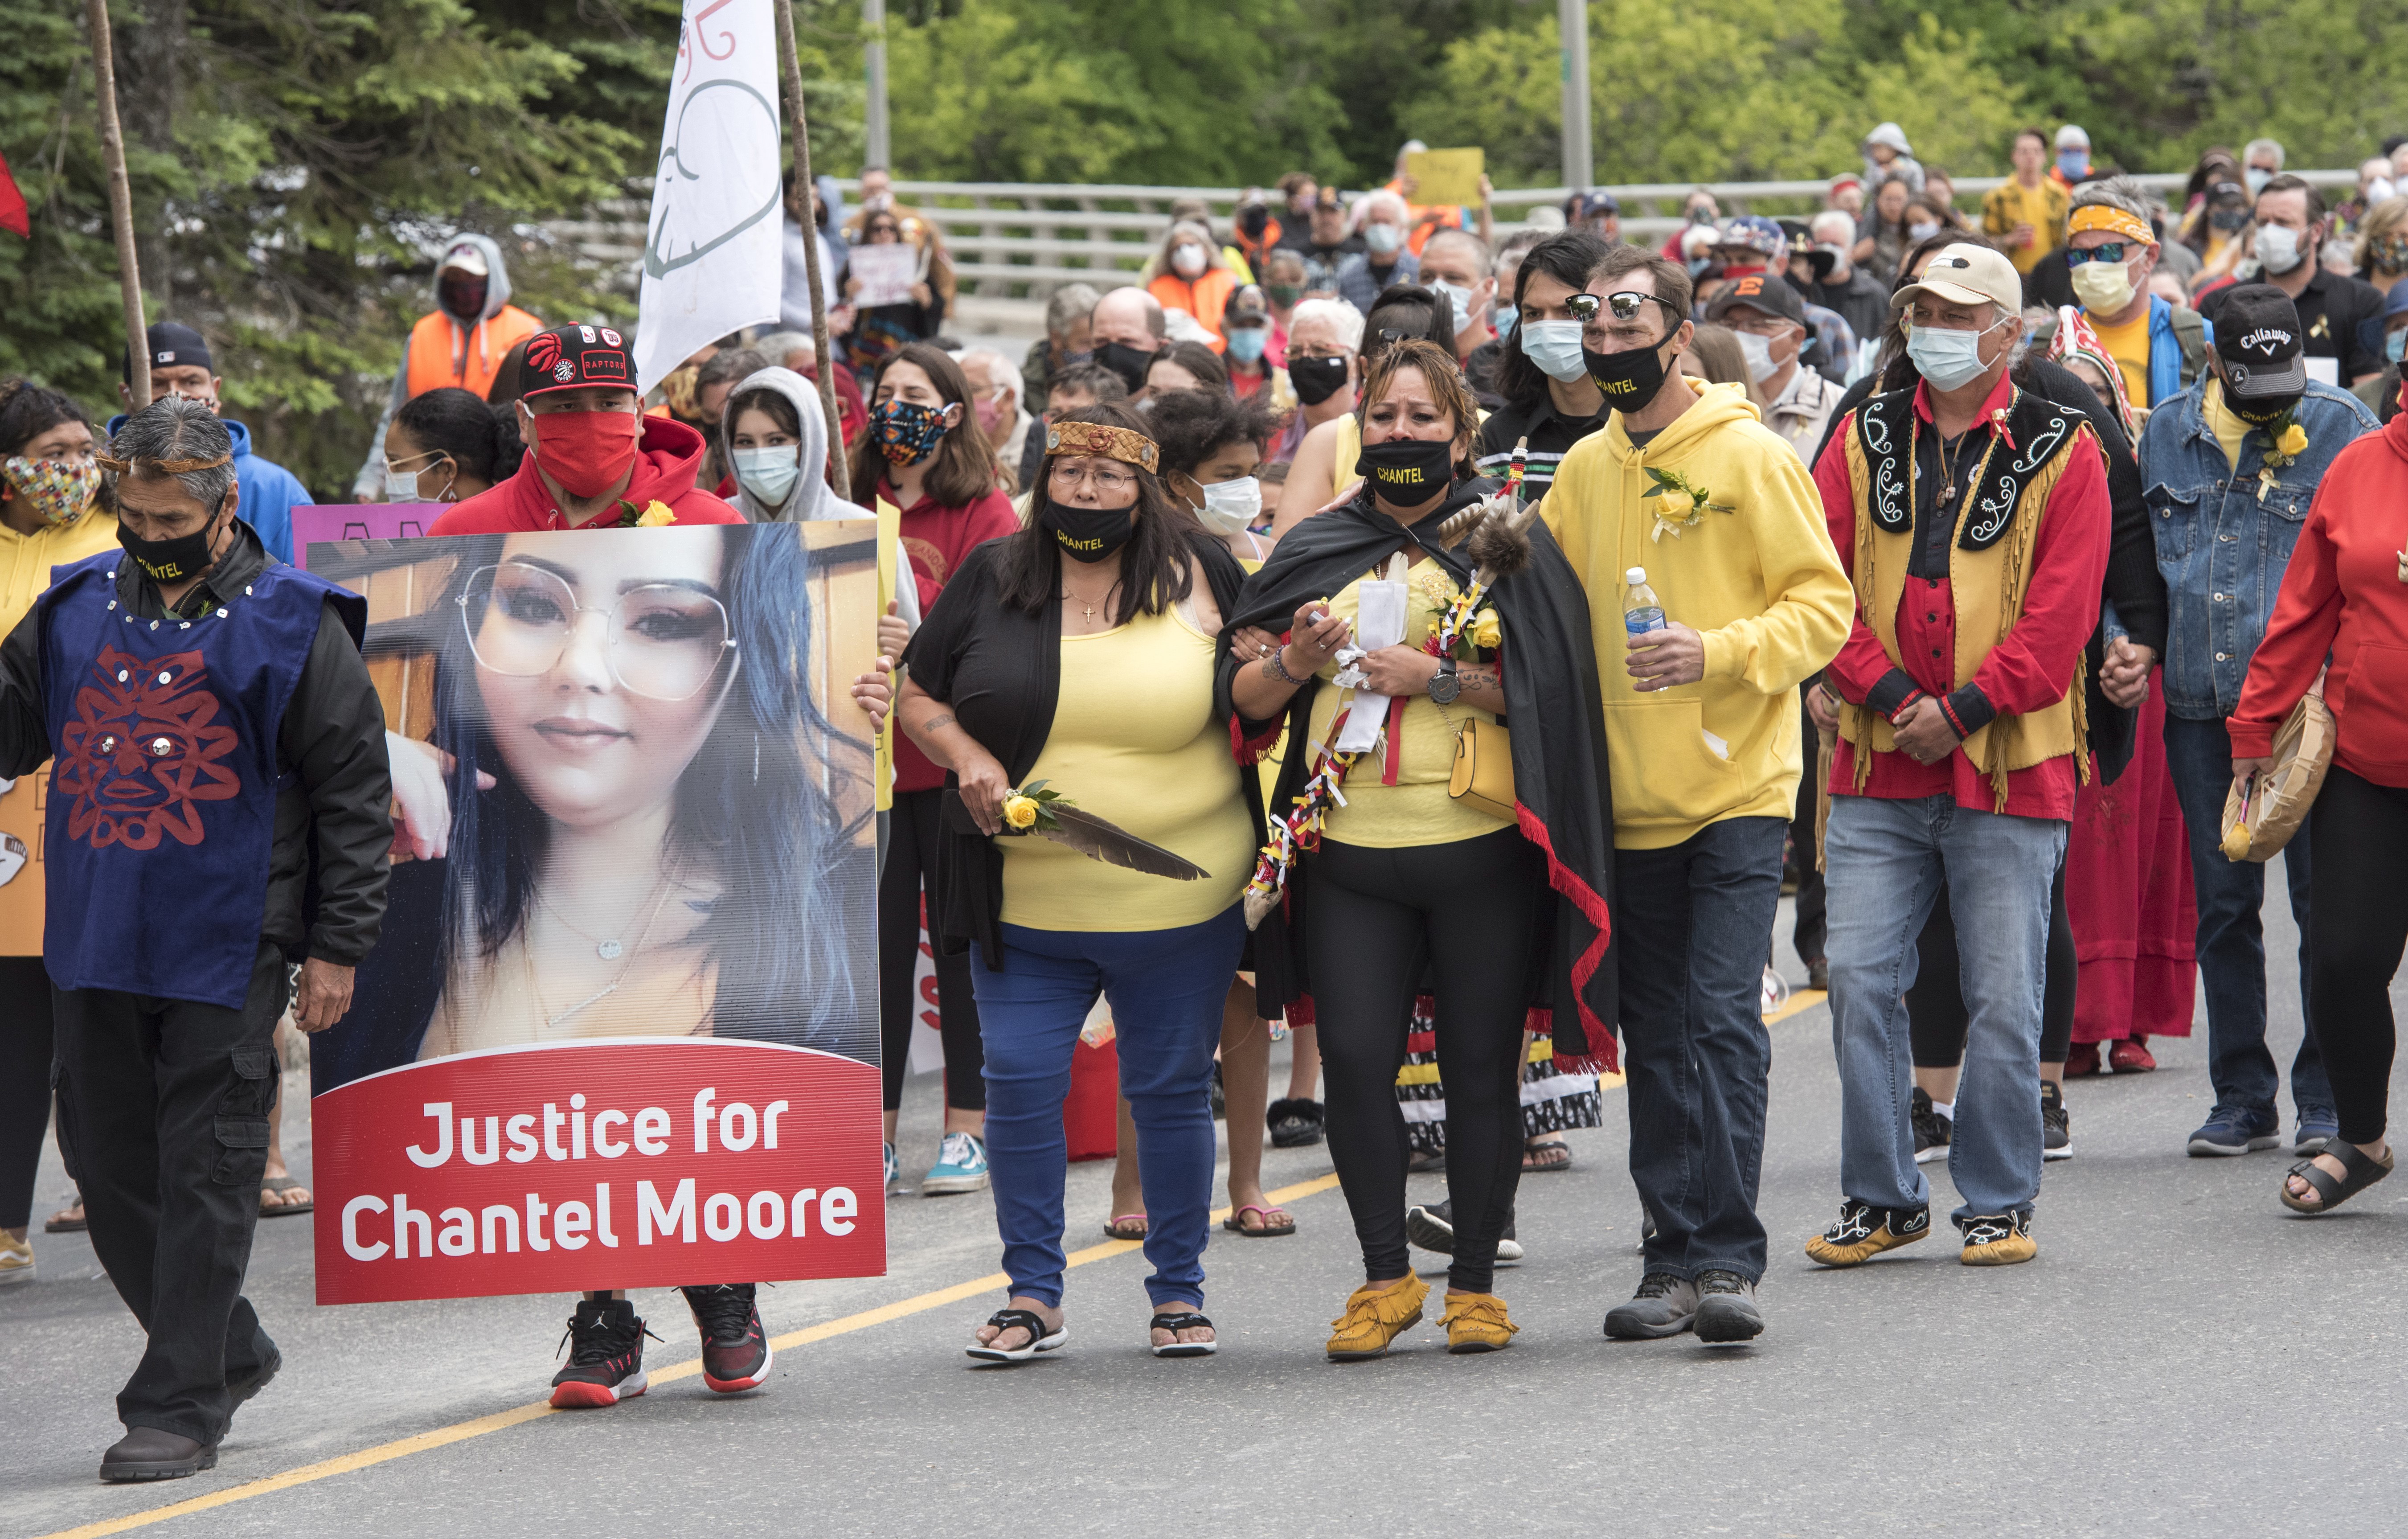 Chantel Moore’s mother Martha Martin, centre, participates in a healing walk from the Madawaska Malaseet reserve to Edmundston's town square honour Moore in Edmundston, N.B. Moore was a 26-year-old Indigenous woman who was fatally shot by police in Edmundston.